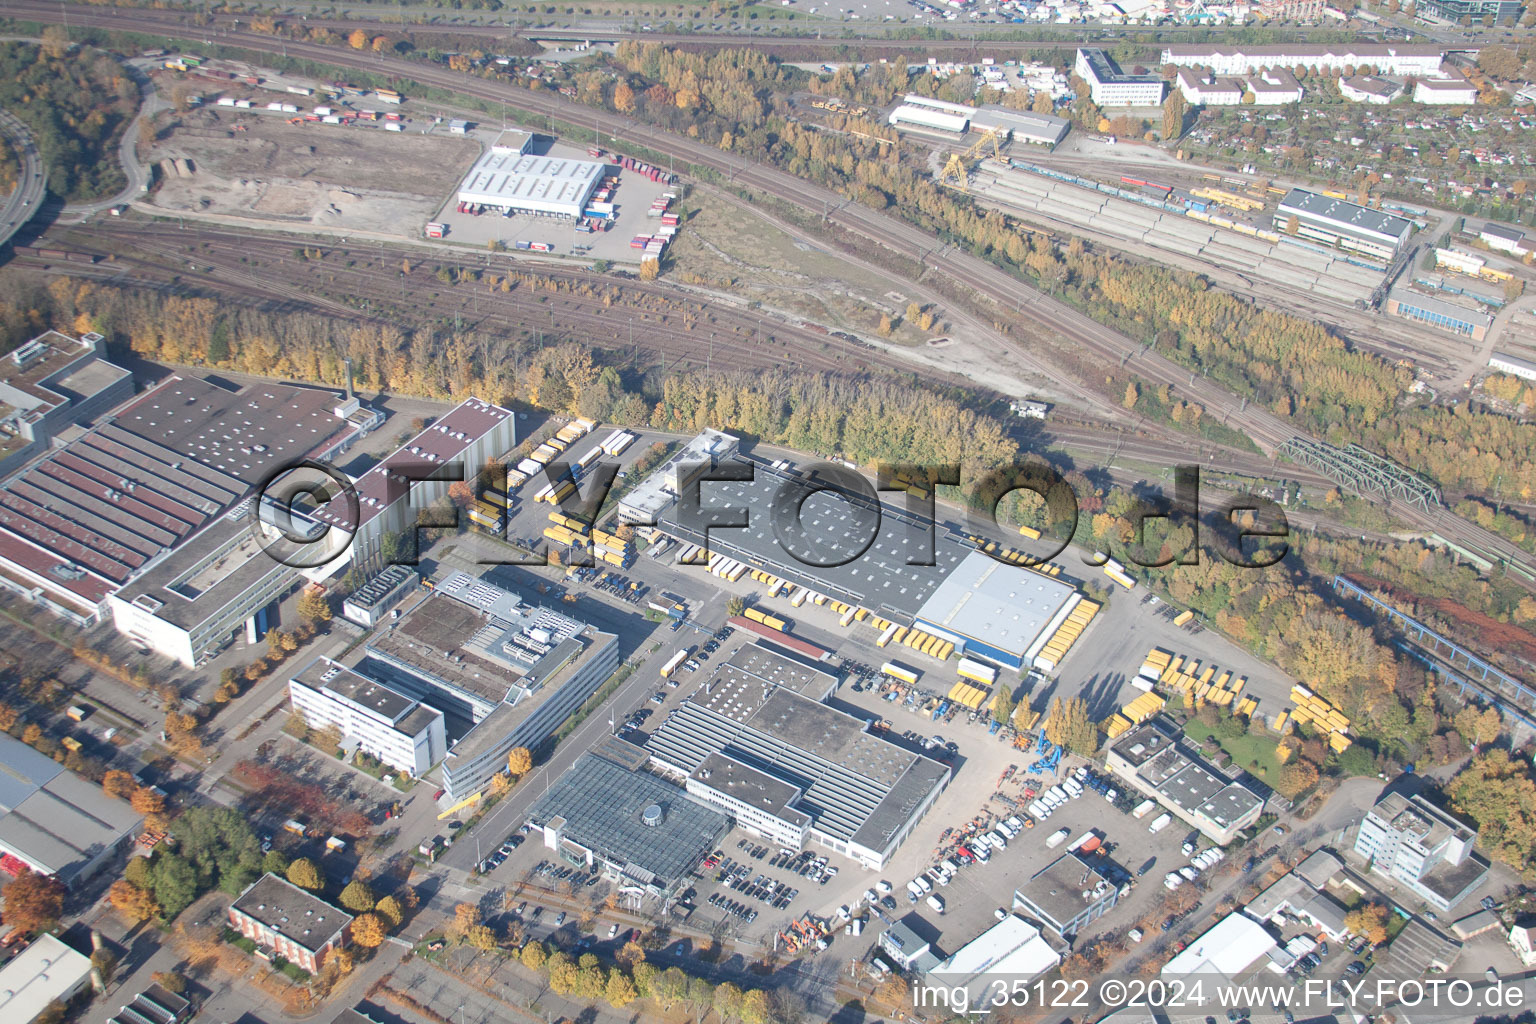 Oblique view of Warehouses and forwarding building SWS-Speditions-GmbH, Otto-street in the district Durlach in Karlsruhe in the state Baden-Wurttemberg